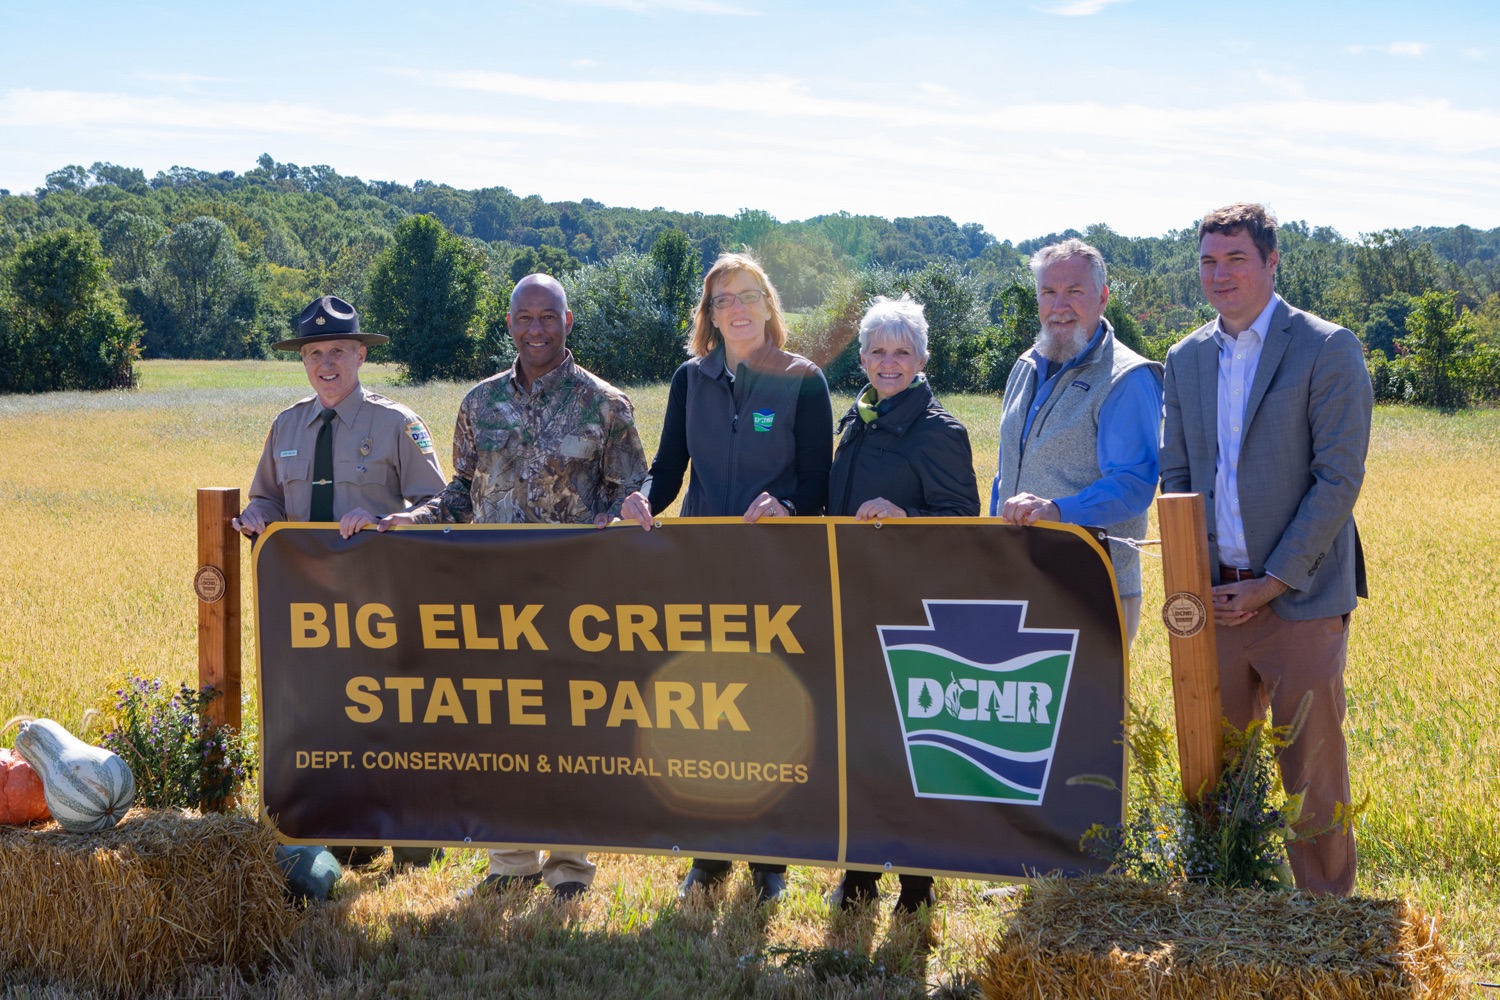 John Hallas - State Parks Director with DCNR, Todd Pride - President of Legacy Land & Water Foundation, Cindy Adams Dunn - Secretary of DCNR, Senator Carolyn Comitta, John Norbeck - Deputy Secretary DCNR, Josh Maxwell - Chester County Commissioner<br><a href="https://filesource.amperwave.net/commonwealthofpa/photo/22226_DCNR_ChesterCounty_ERD_32.jpg" target="_blank">⇣ Download Photo</a>